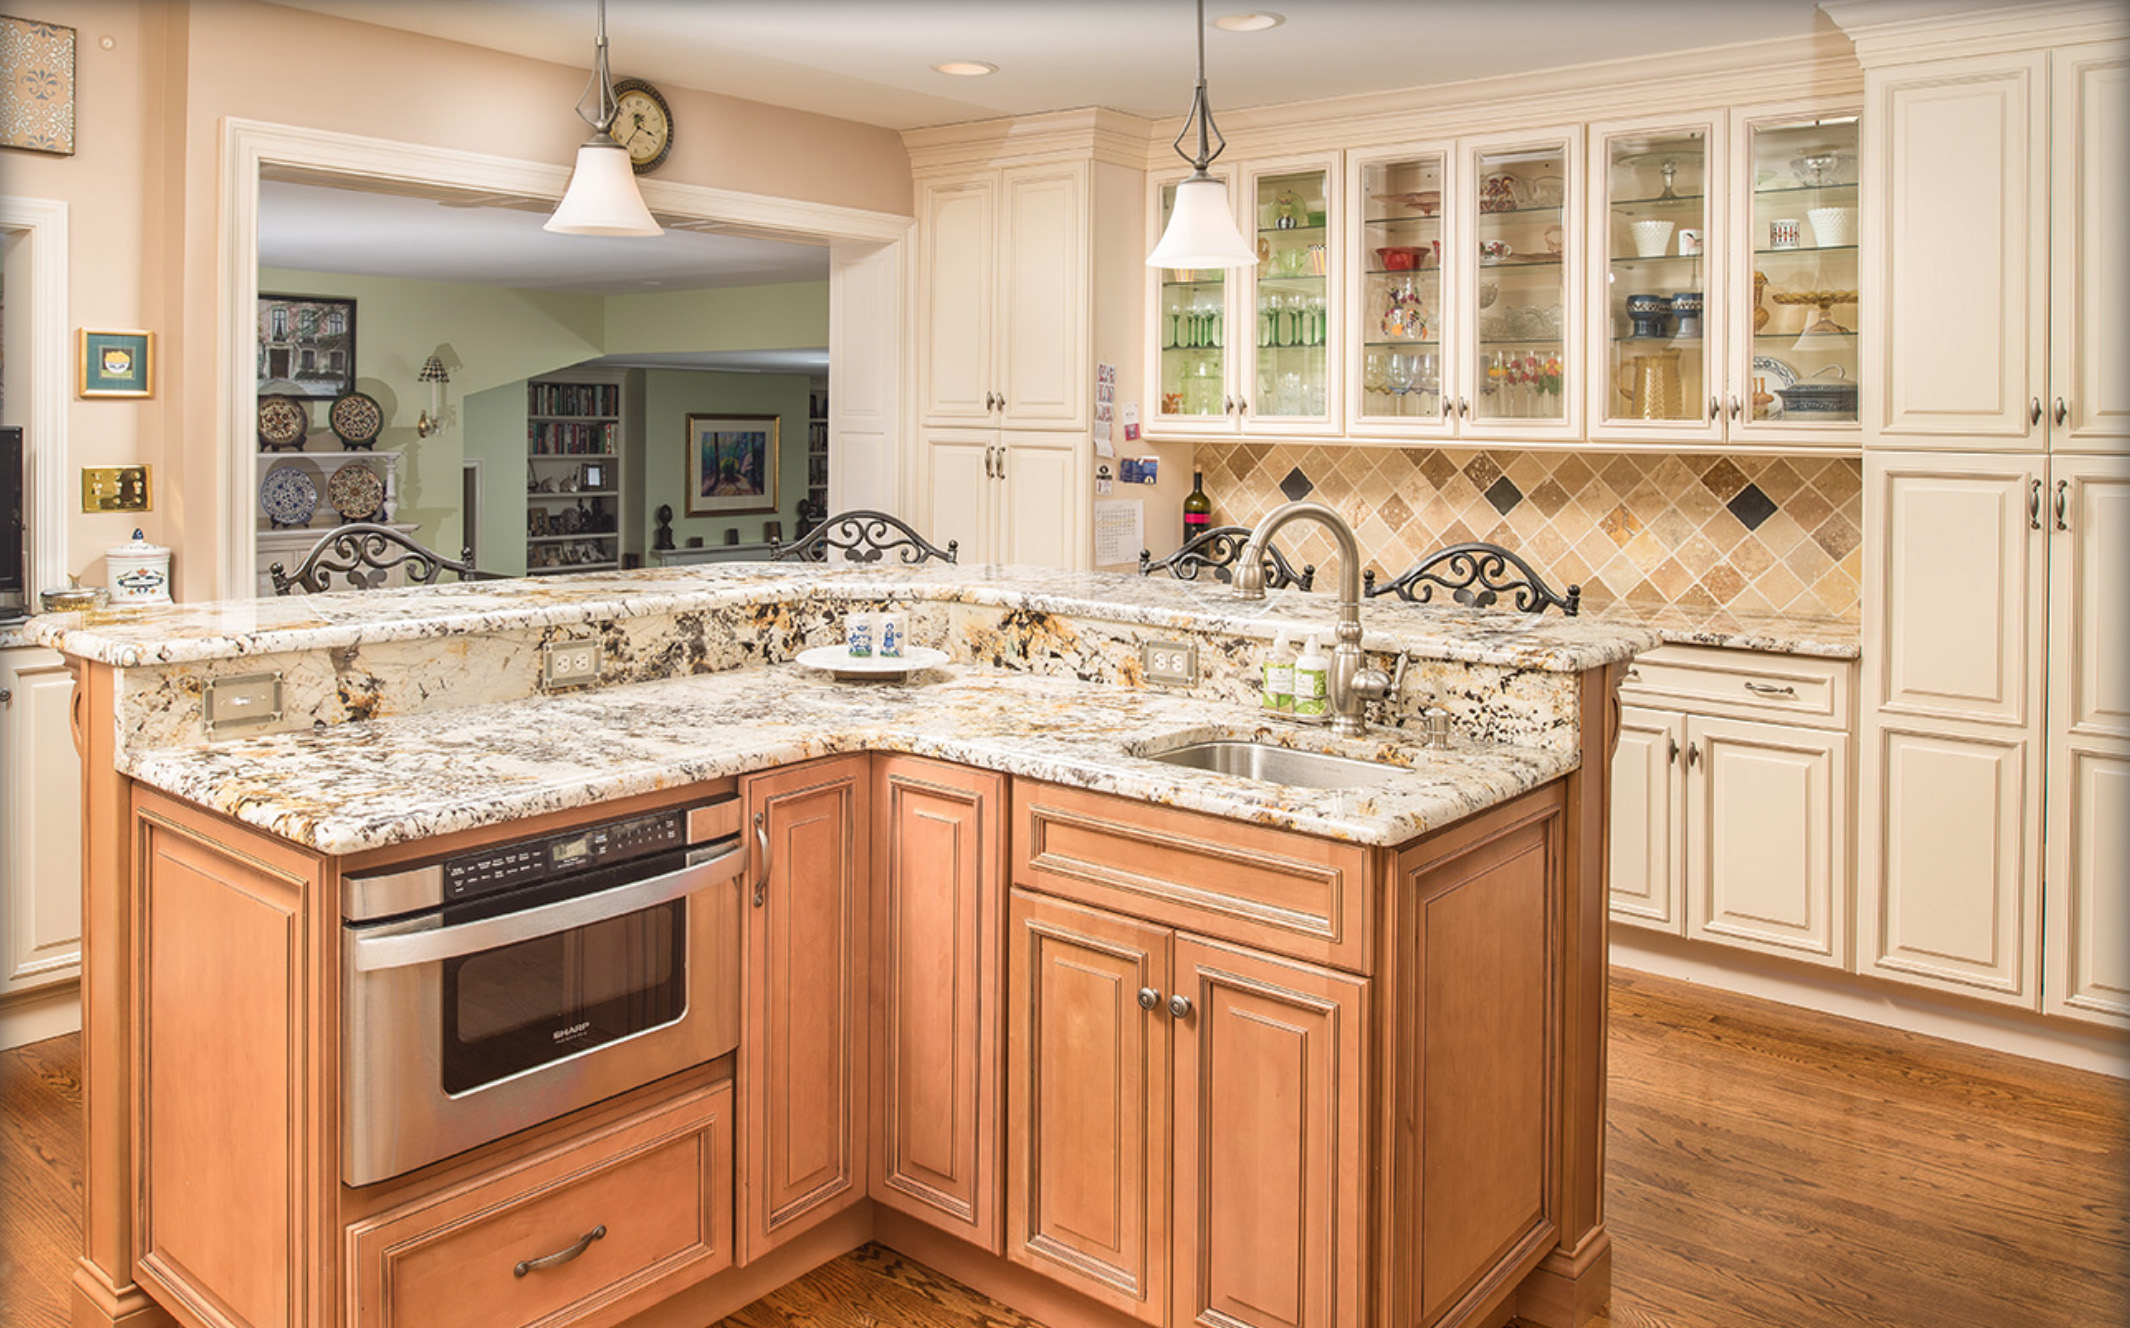 Wholesale Kitchen Cabinets In Washington Dc In Stock Today Cabinets